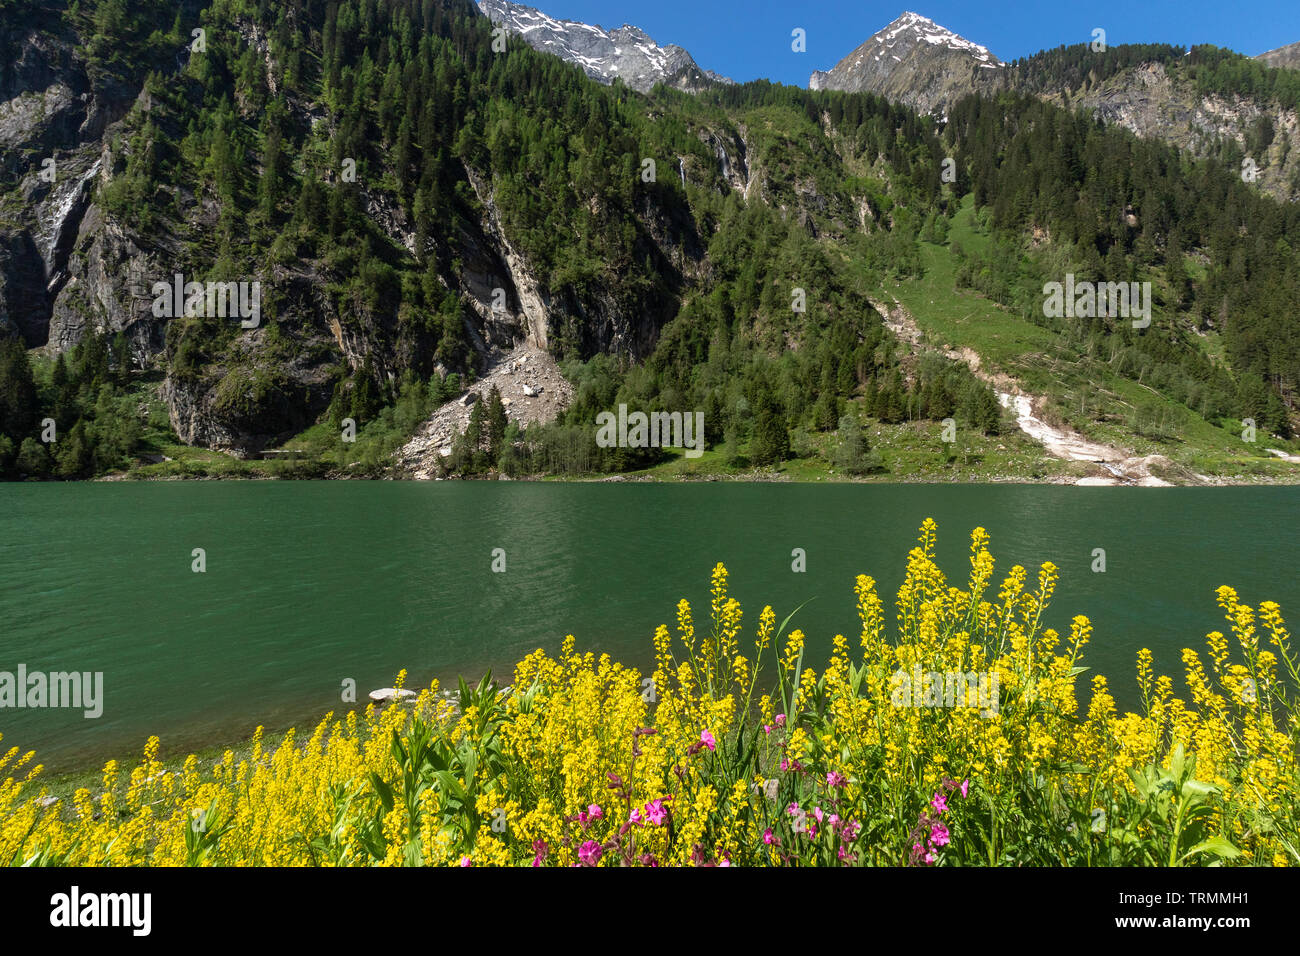 Alpine lake spring summer landscape with yellow flowers in foreground Stillup Lake Austria Tyrol Stock Photo